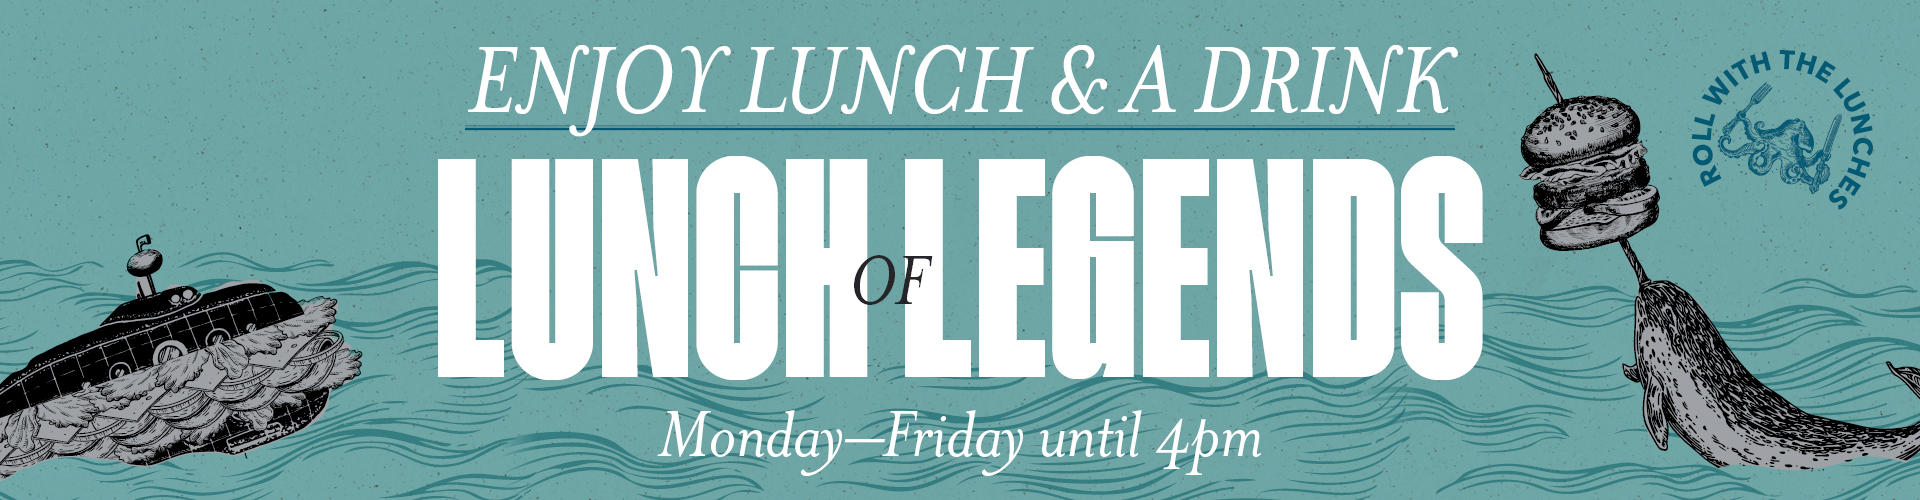 Lunch and a drink offers in Preston | The Adelphi